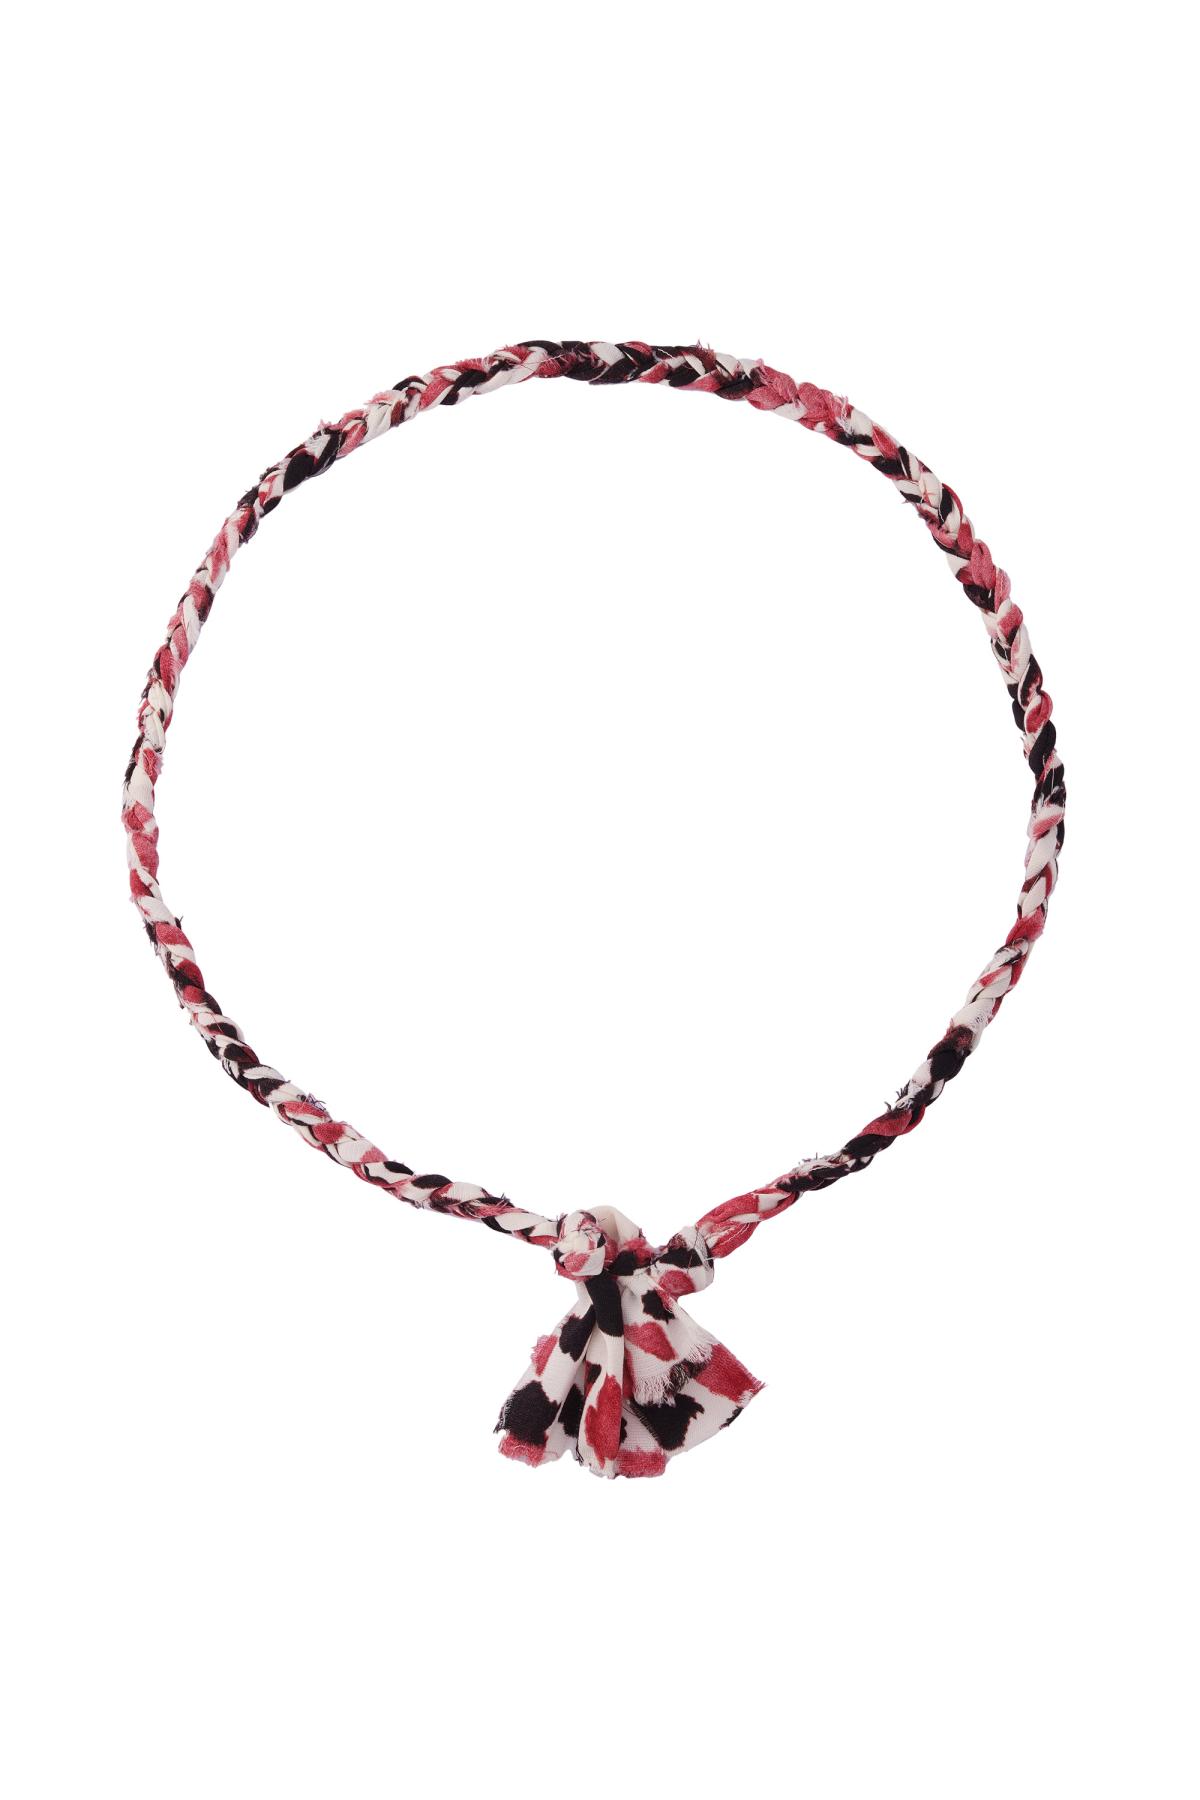 Necklace frayed fabric Coral Polyester h5 